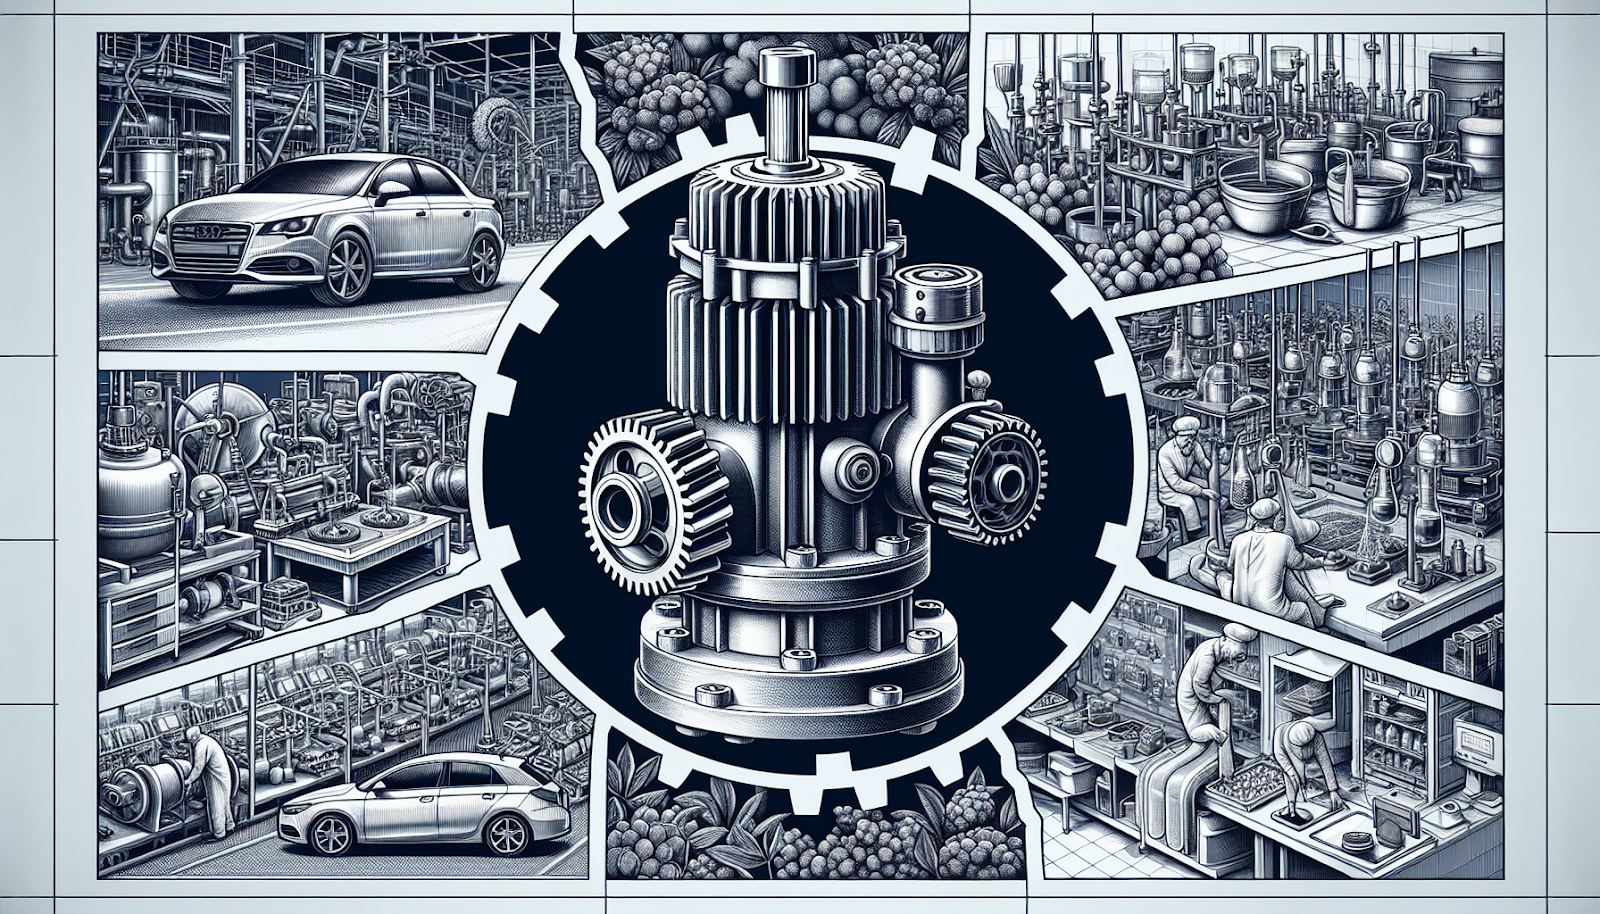 Illustration of gear pump applications in automotive, food, and chemical industries